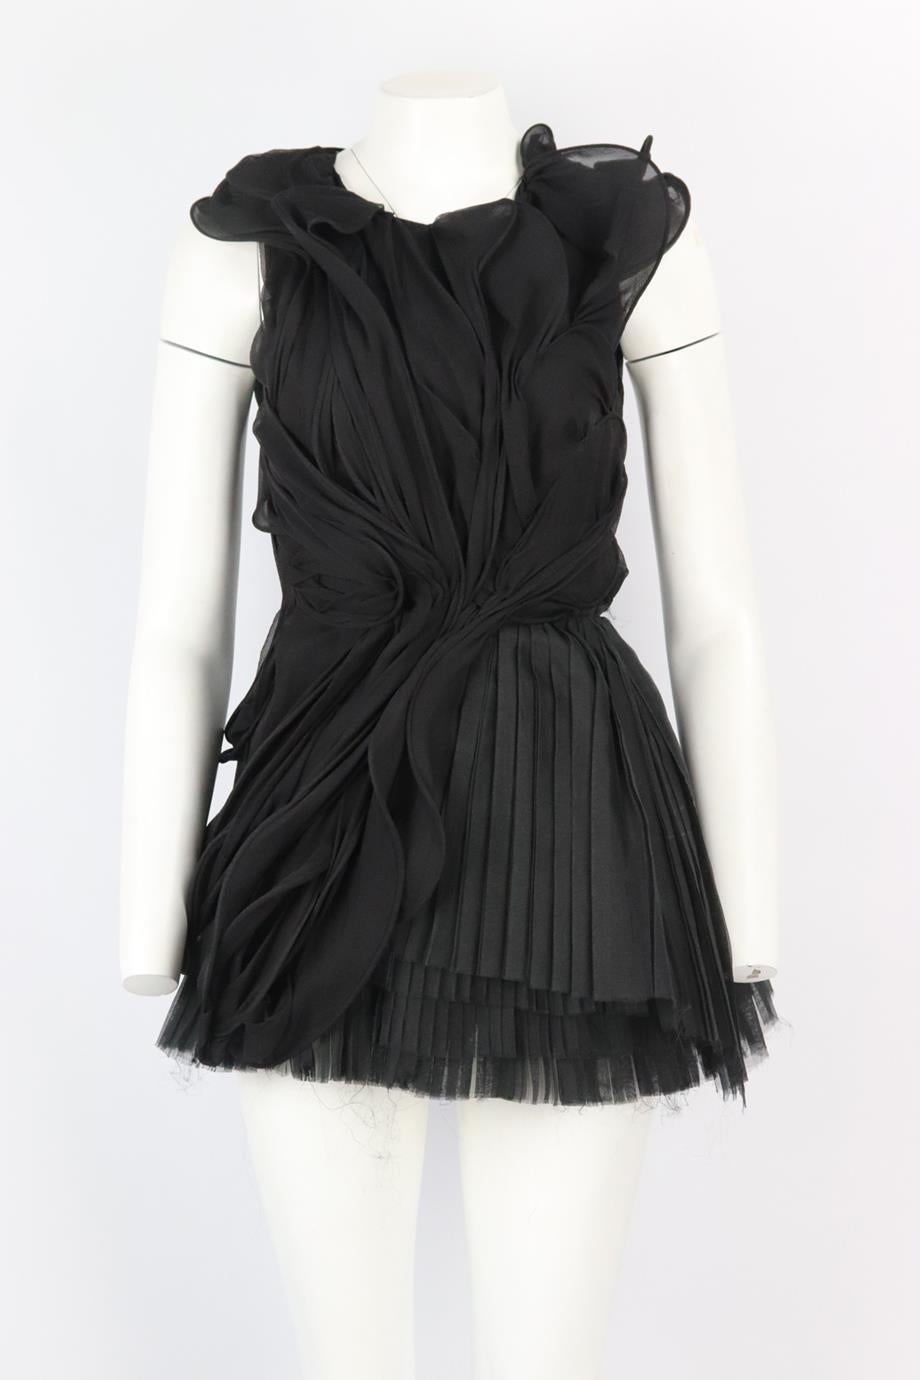 Ana Sekularac ruffled silk mini dress. Black. Sleeveless, crewneck. Zip fastening at back. 100% Silk. Size: UK 8 (US 4, FR 36, IT 40). Bust: 32 in. Waist: 26 in. Hips: 40 in. Length: 28.5 in. Very good condition - No sign of wear; see pictures.